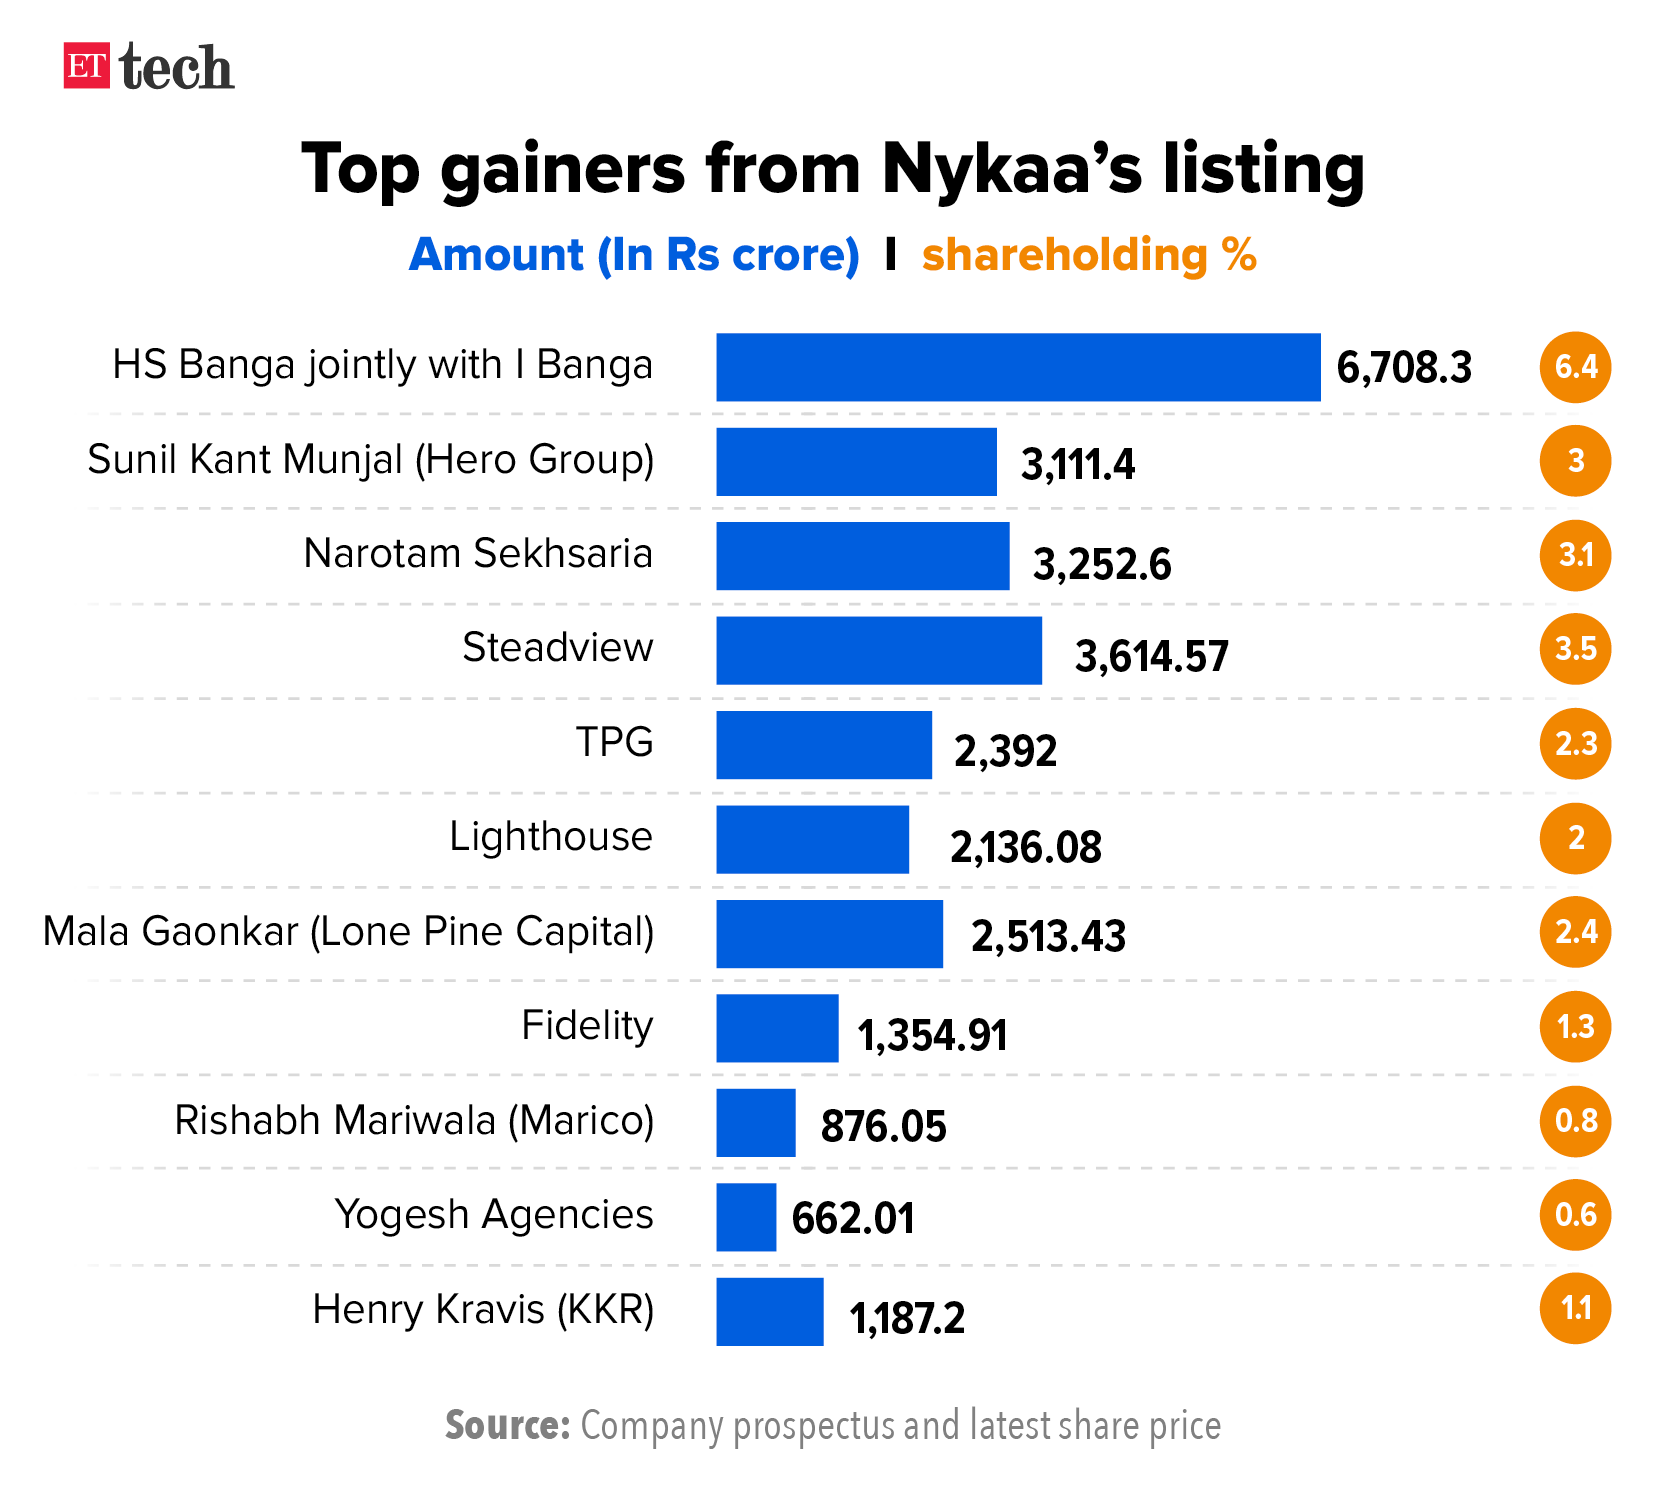 Top gainers from Nykaa